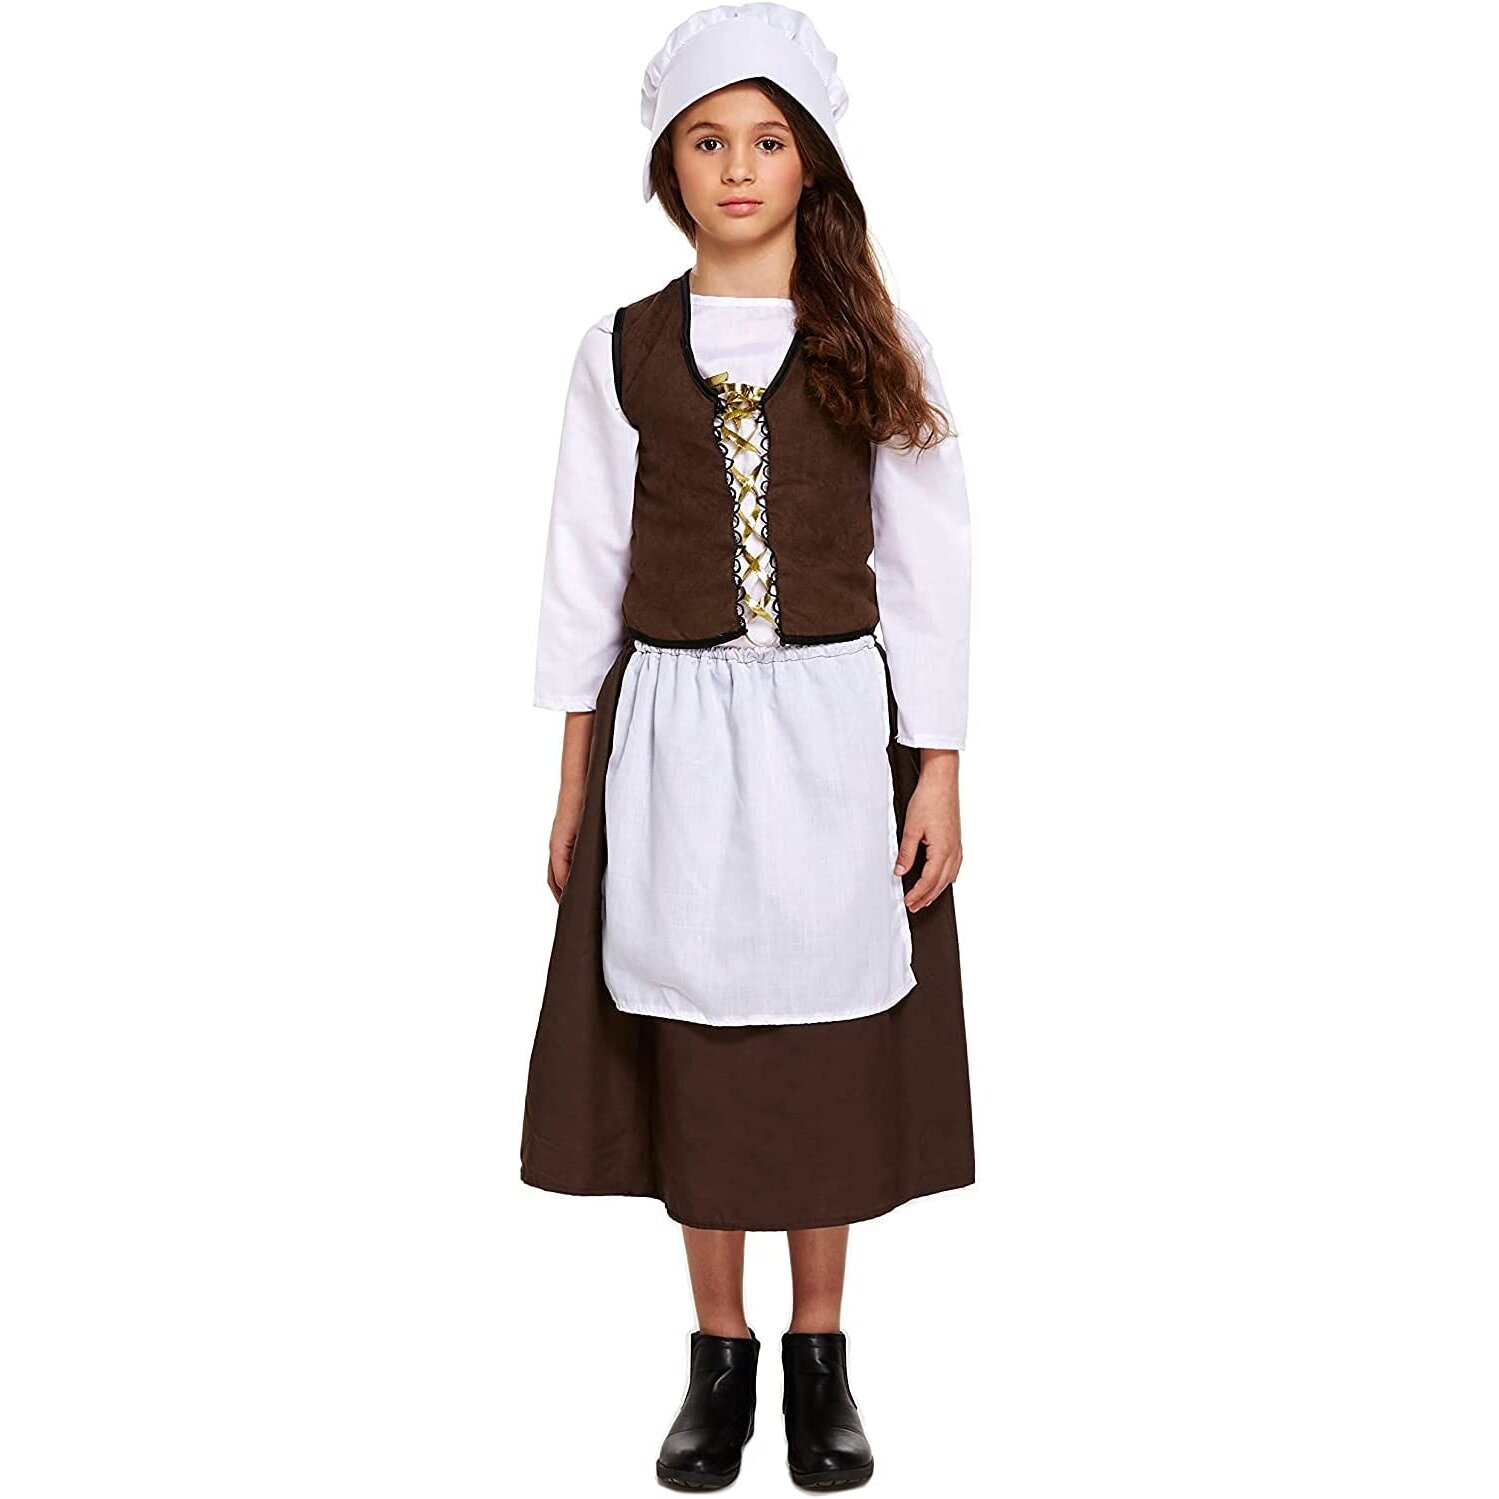 Victorian Maid Girls Fancy Dress Servant World Book Day Week Kids Child Costume (Small Ages 4 -6 years)